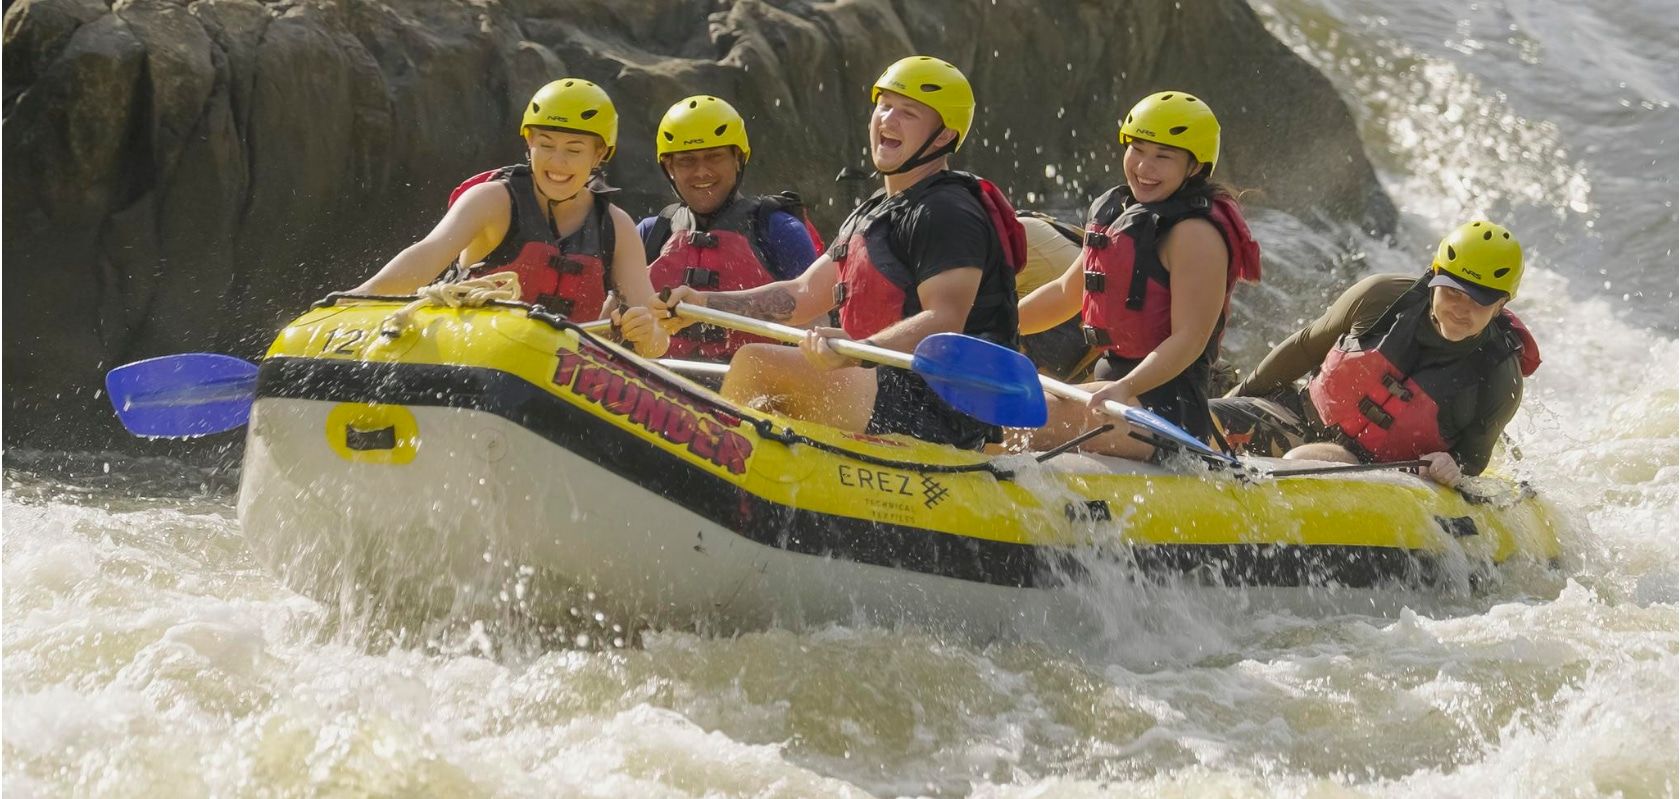 A Group Of People Riding On A Raft In The Water at Rapids Adventures